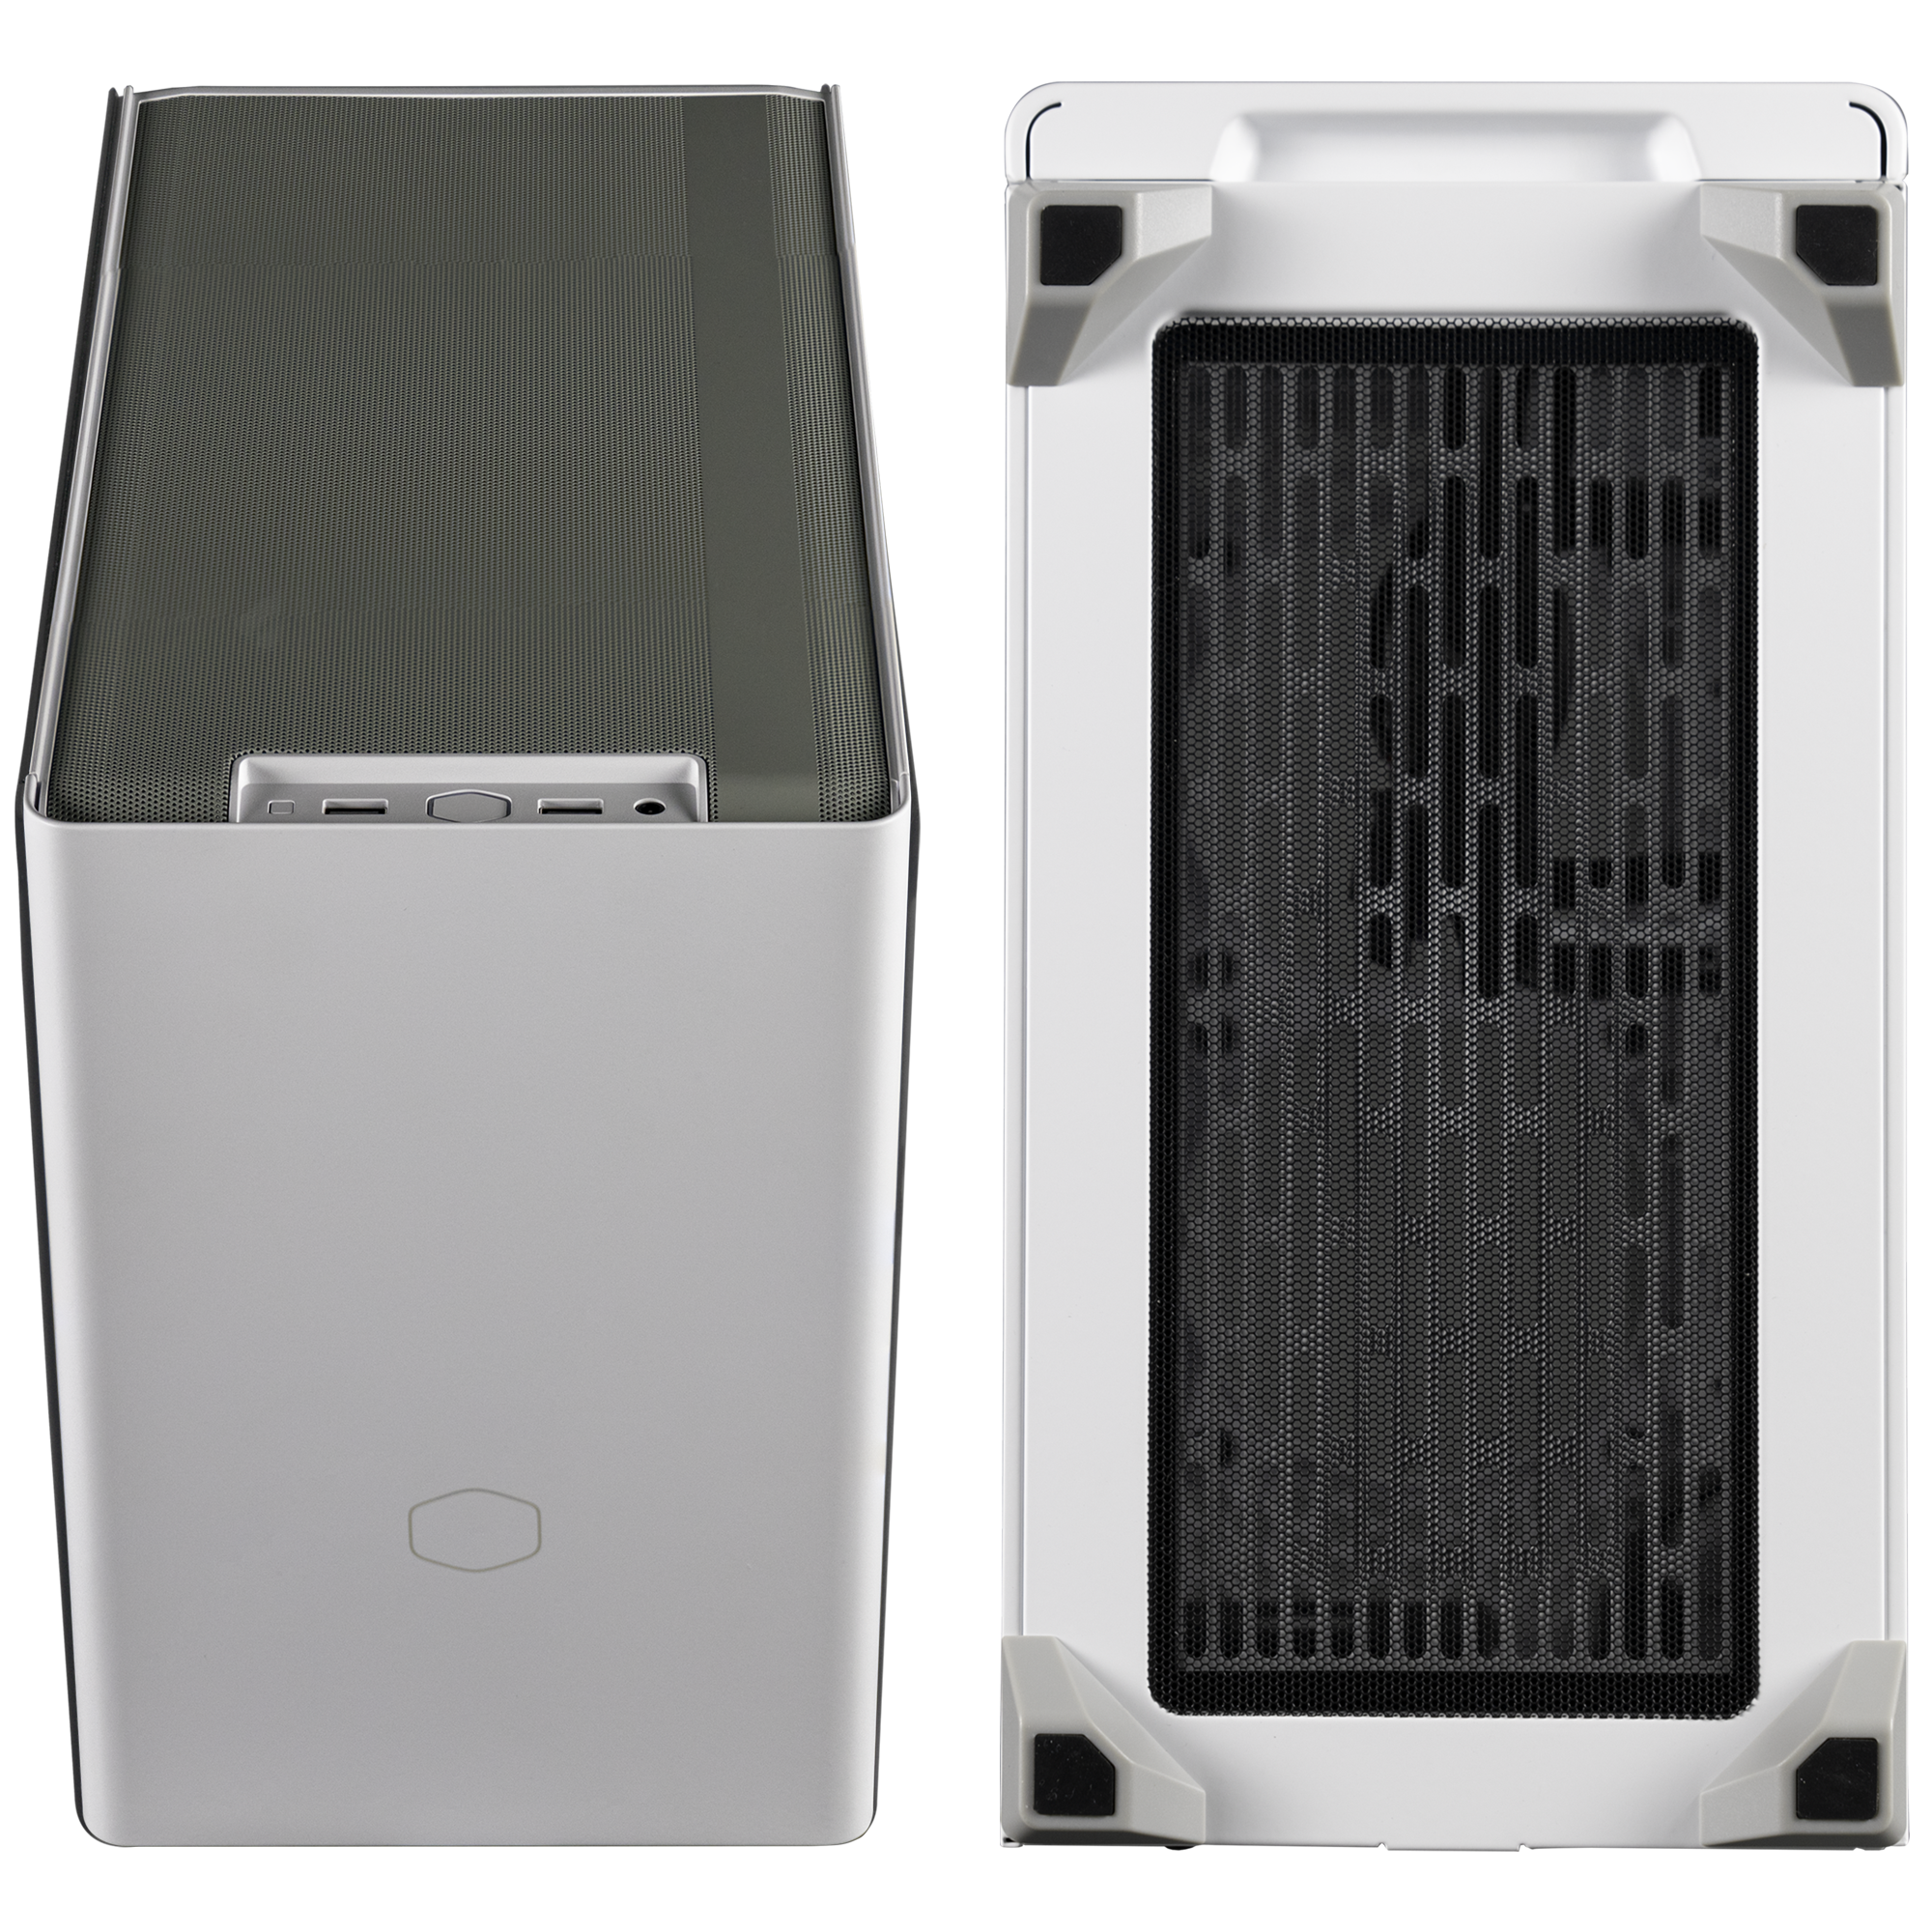  Cooler Master NR200 White SFF Small Form Factor